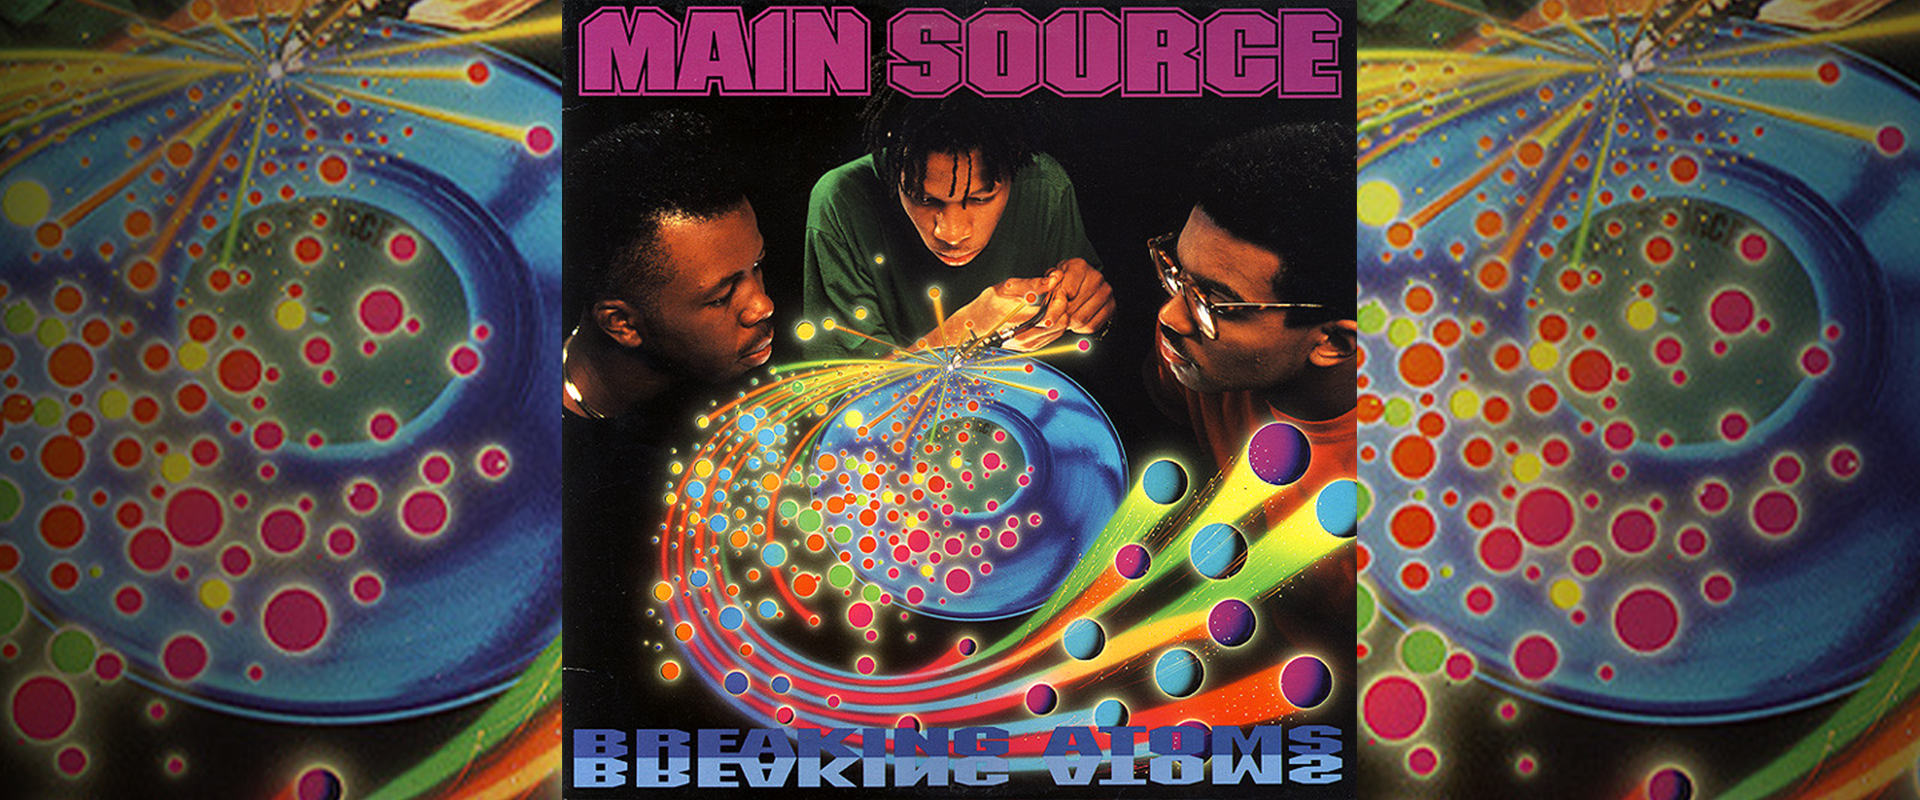 Classic Albums: 'Breaking Atoms' by Main Source